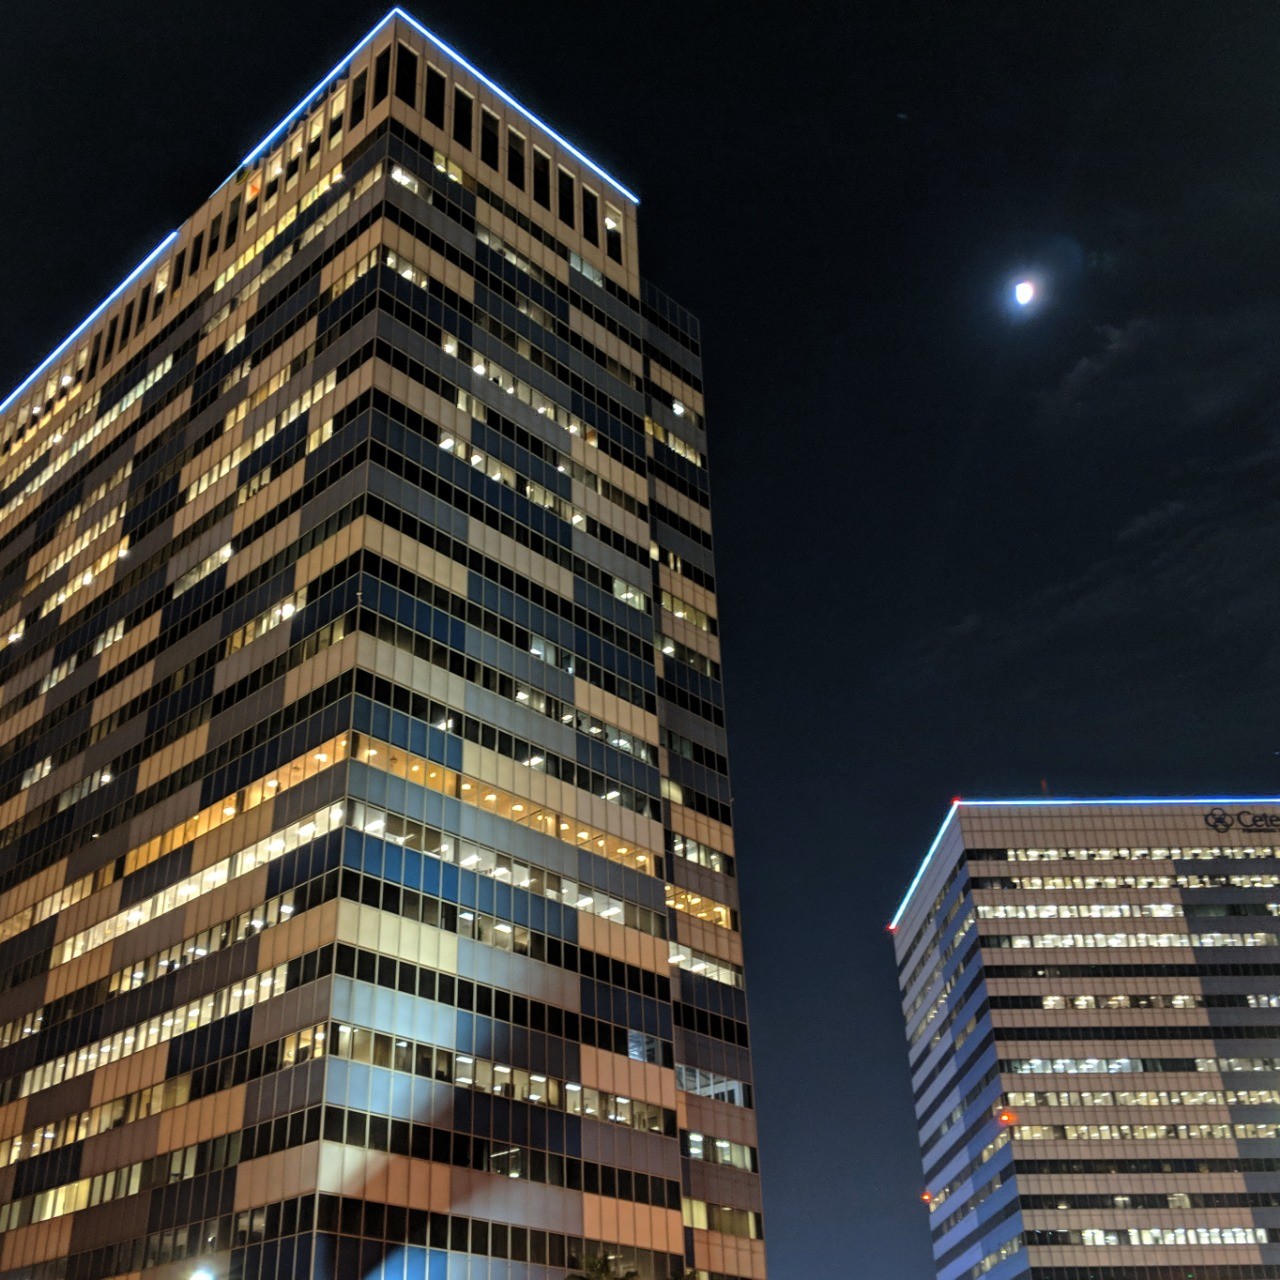 Two high-rise office buildings at night.